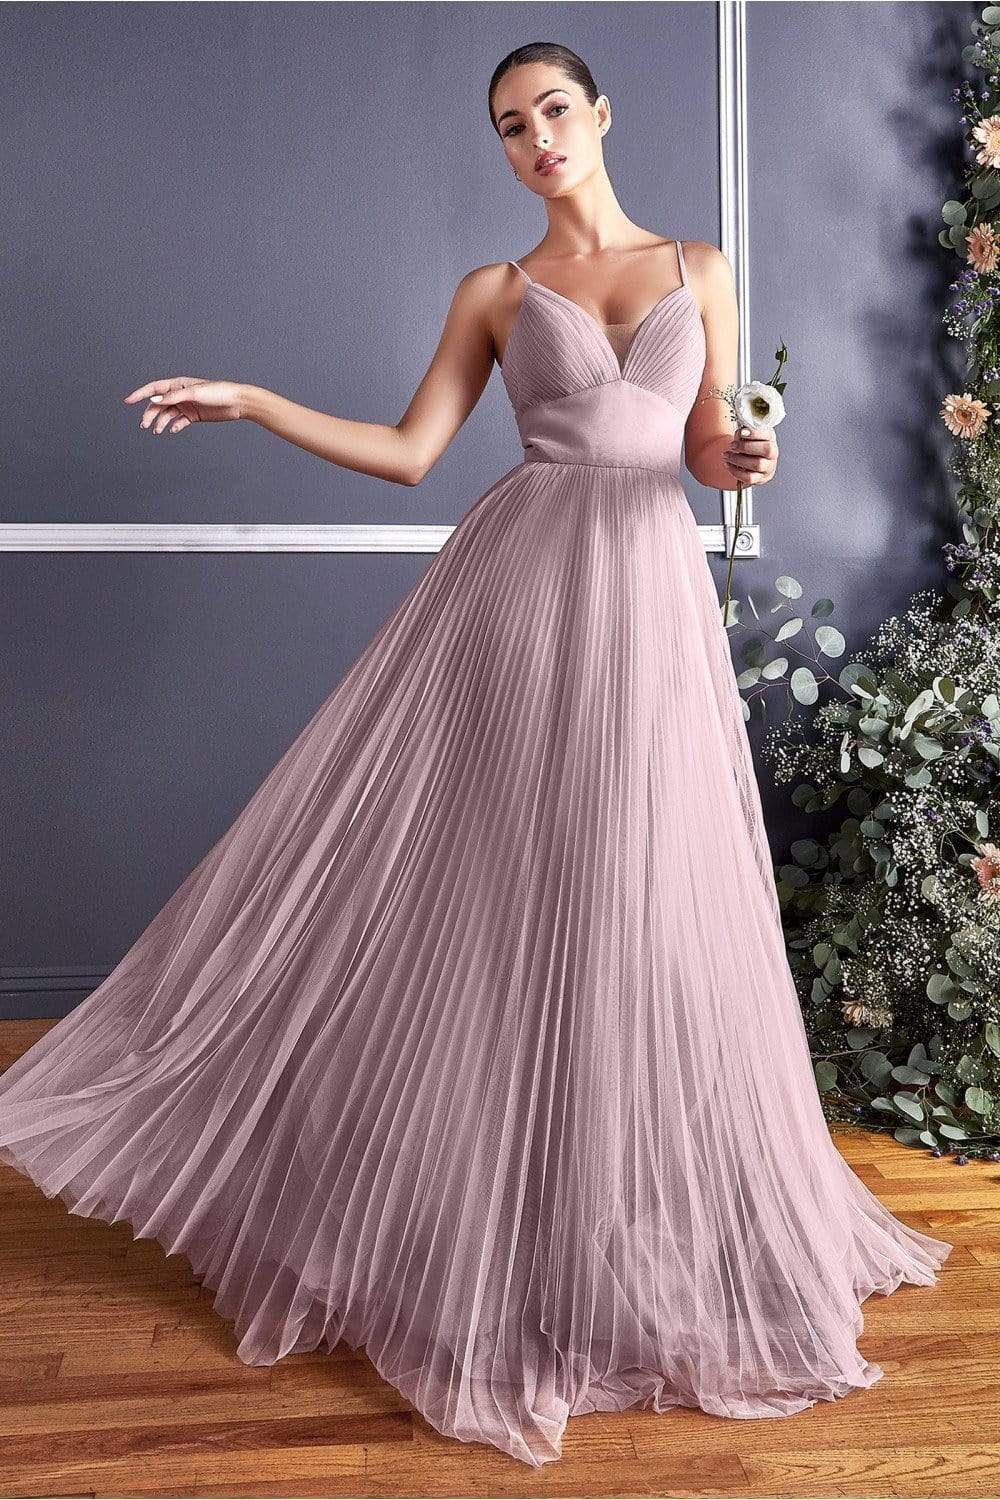 Cinderella Divine - CD184 Sleeveless Pleated Tulle A-Line Gown Bridesmaid Dresses 4 / Mauve